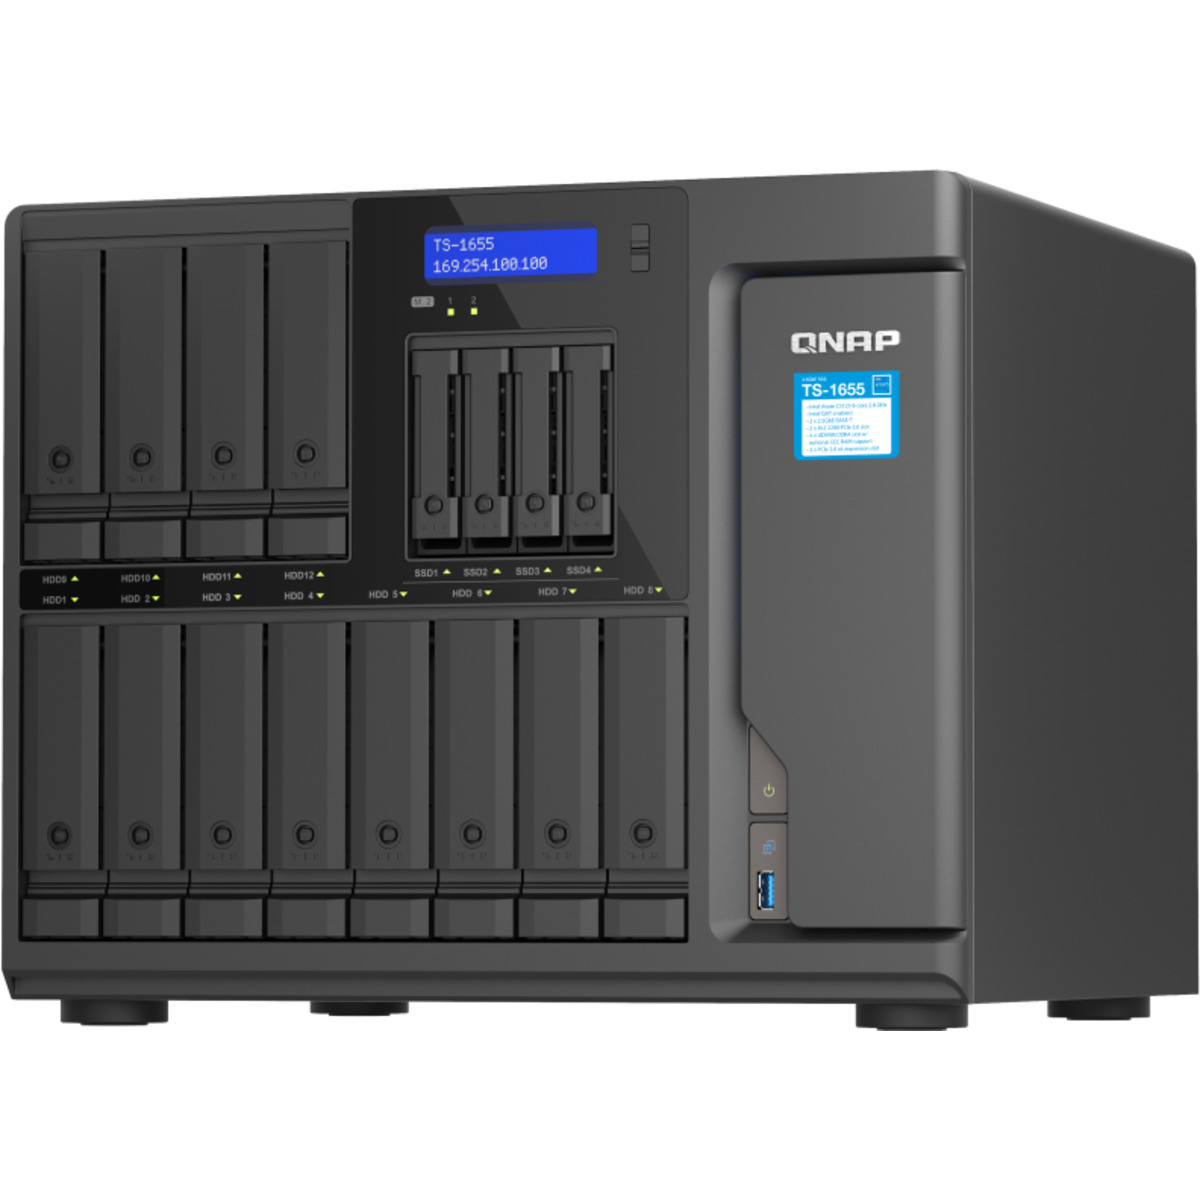 QNAP TS-1655 200tb 12+4-Bay Desktop Multimedia / Power User / Business NAS - Network Attached Storage Device 10x20tb Western Digital Ultrastar HC560 WUH722020ALE6L4 3.5 7200rpm SATA 6Gb/s HDD ENTERPRISE Class Drives Installed - Burn-In Tested - FREE RAM UPGRADE TS-1655